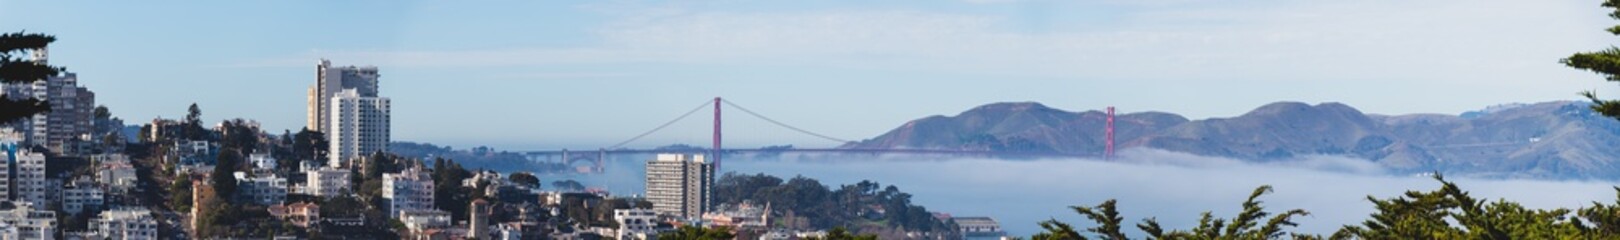 Panoramic View Over the West Side of San Francisco and the Golden Gate Bridge with Fog